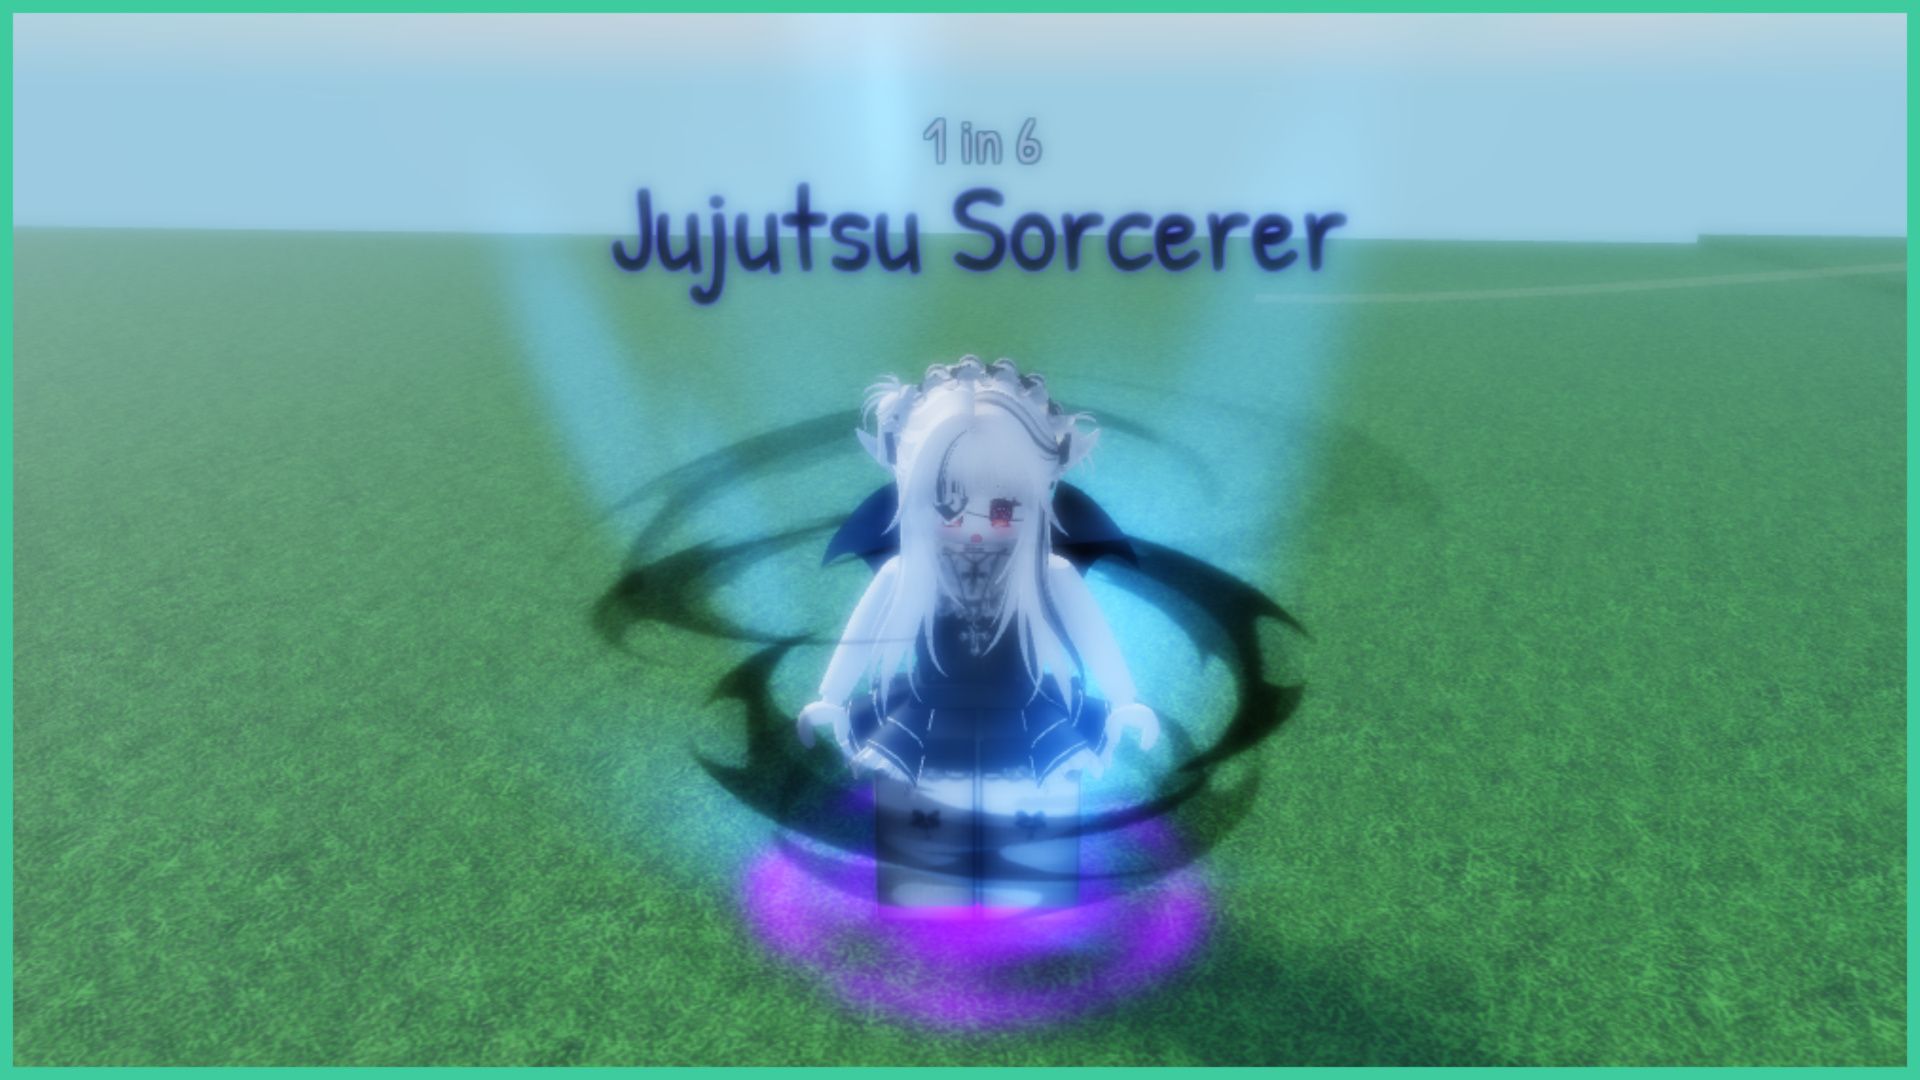 feature image for our cursed rng codes guide, the image is of a player with the jujutsu sorcerer aura equipped as they stand on some grass, the aura has a black mist swirling around the player, as a purple mist swirls around their feet, '1 in 6 jujutsu sorcerer' is written above their head